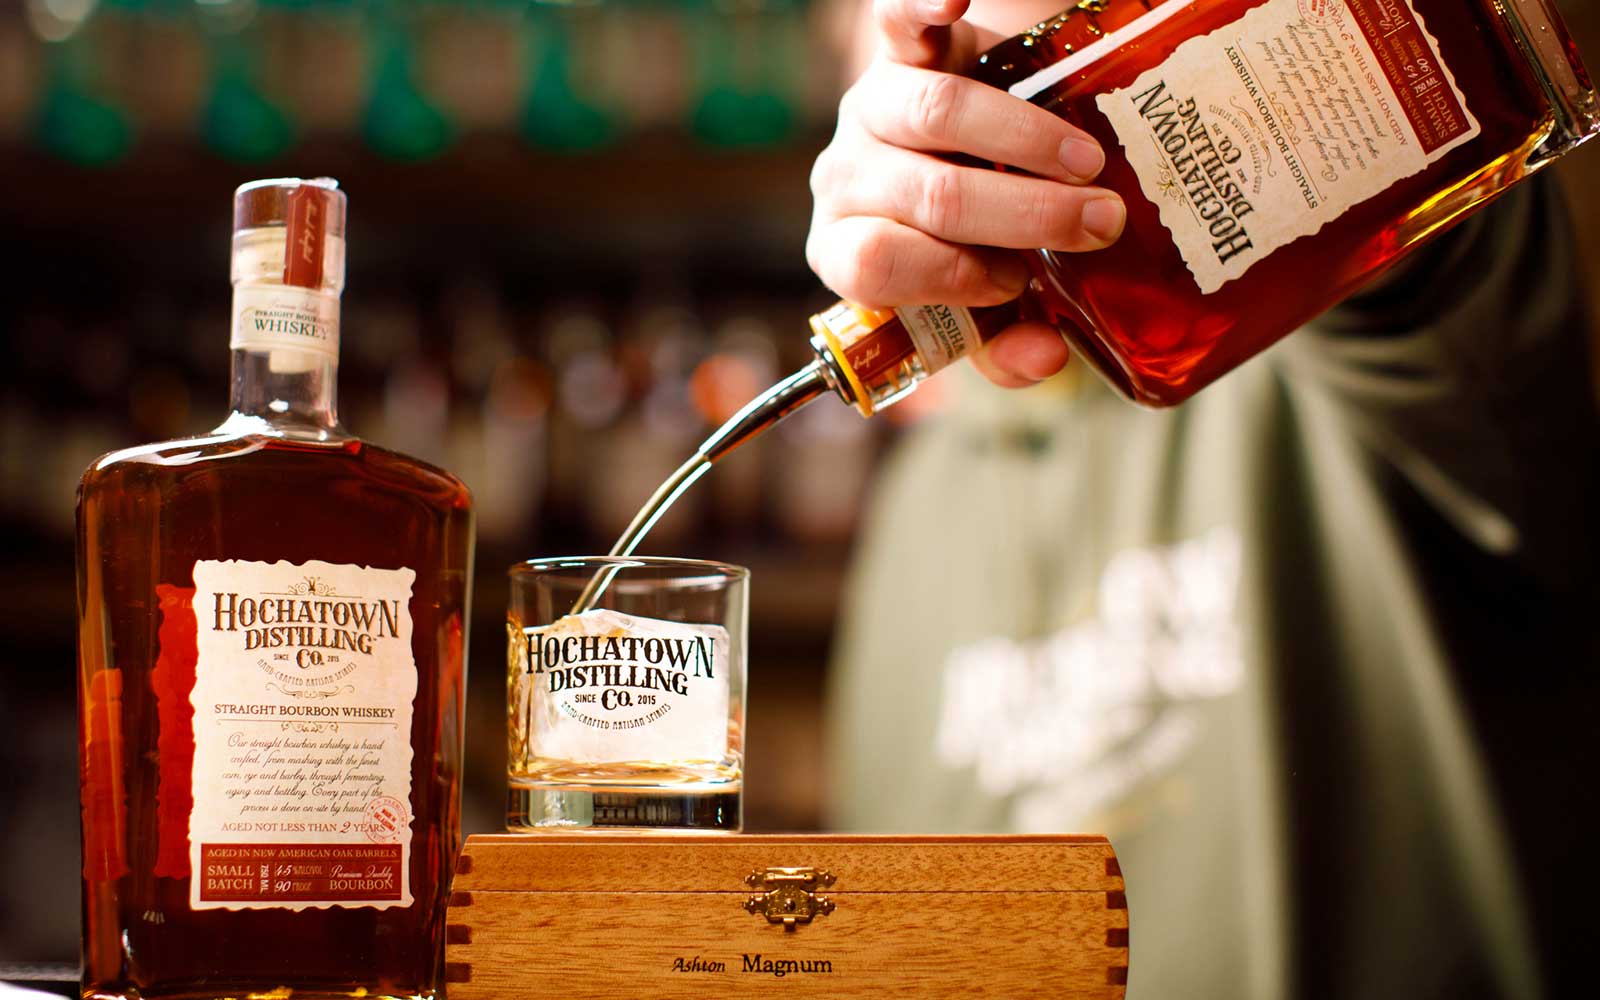 Hochatown Distilling Co is keeping the moonshiner's spirit alive. But instead of white lightning, these distillers are barrel aging their booze into Oklahoma-crafted bourbon whiskey.